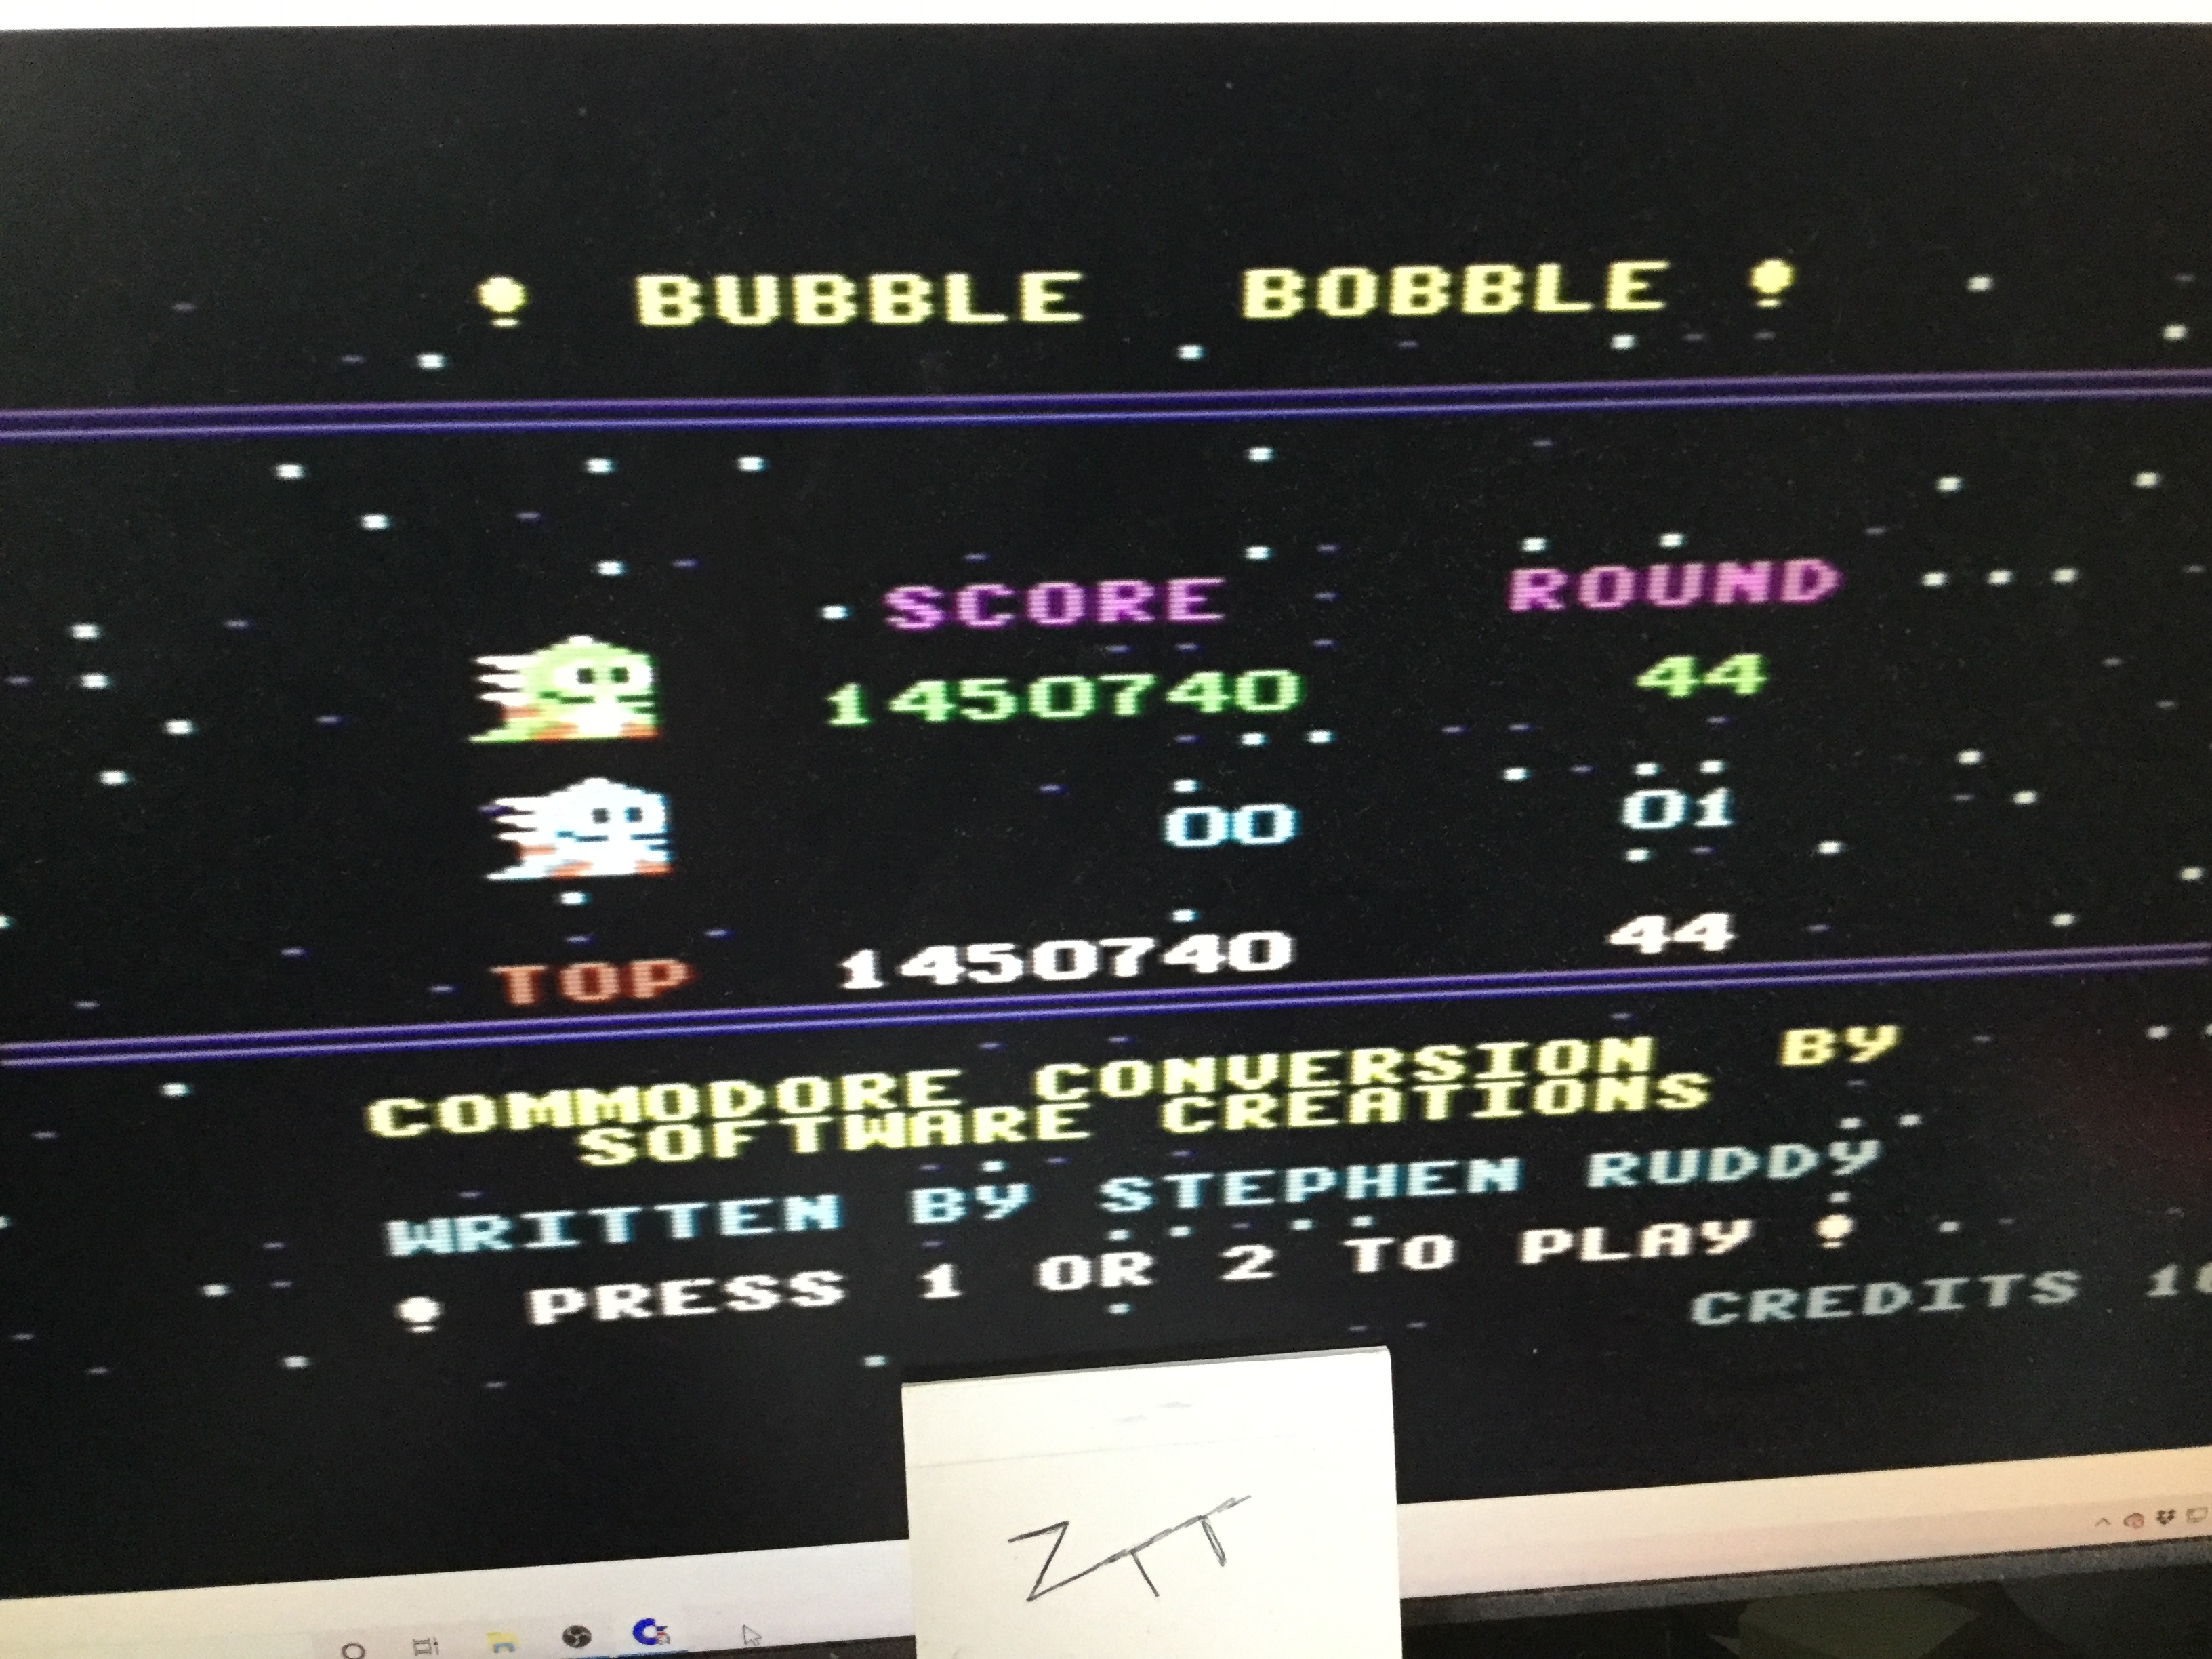 Frankie: Bubble Bobble (Commodore 64 Emulated) 1,450,740 points on 2021-02-07 05:59:51